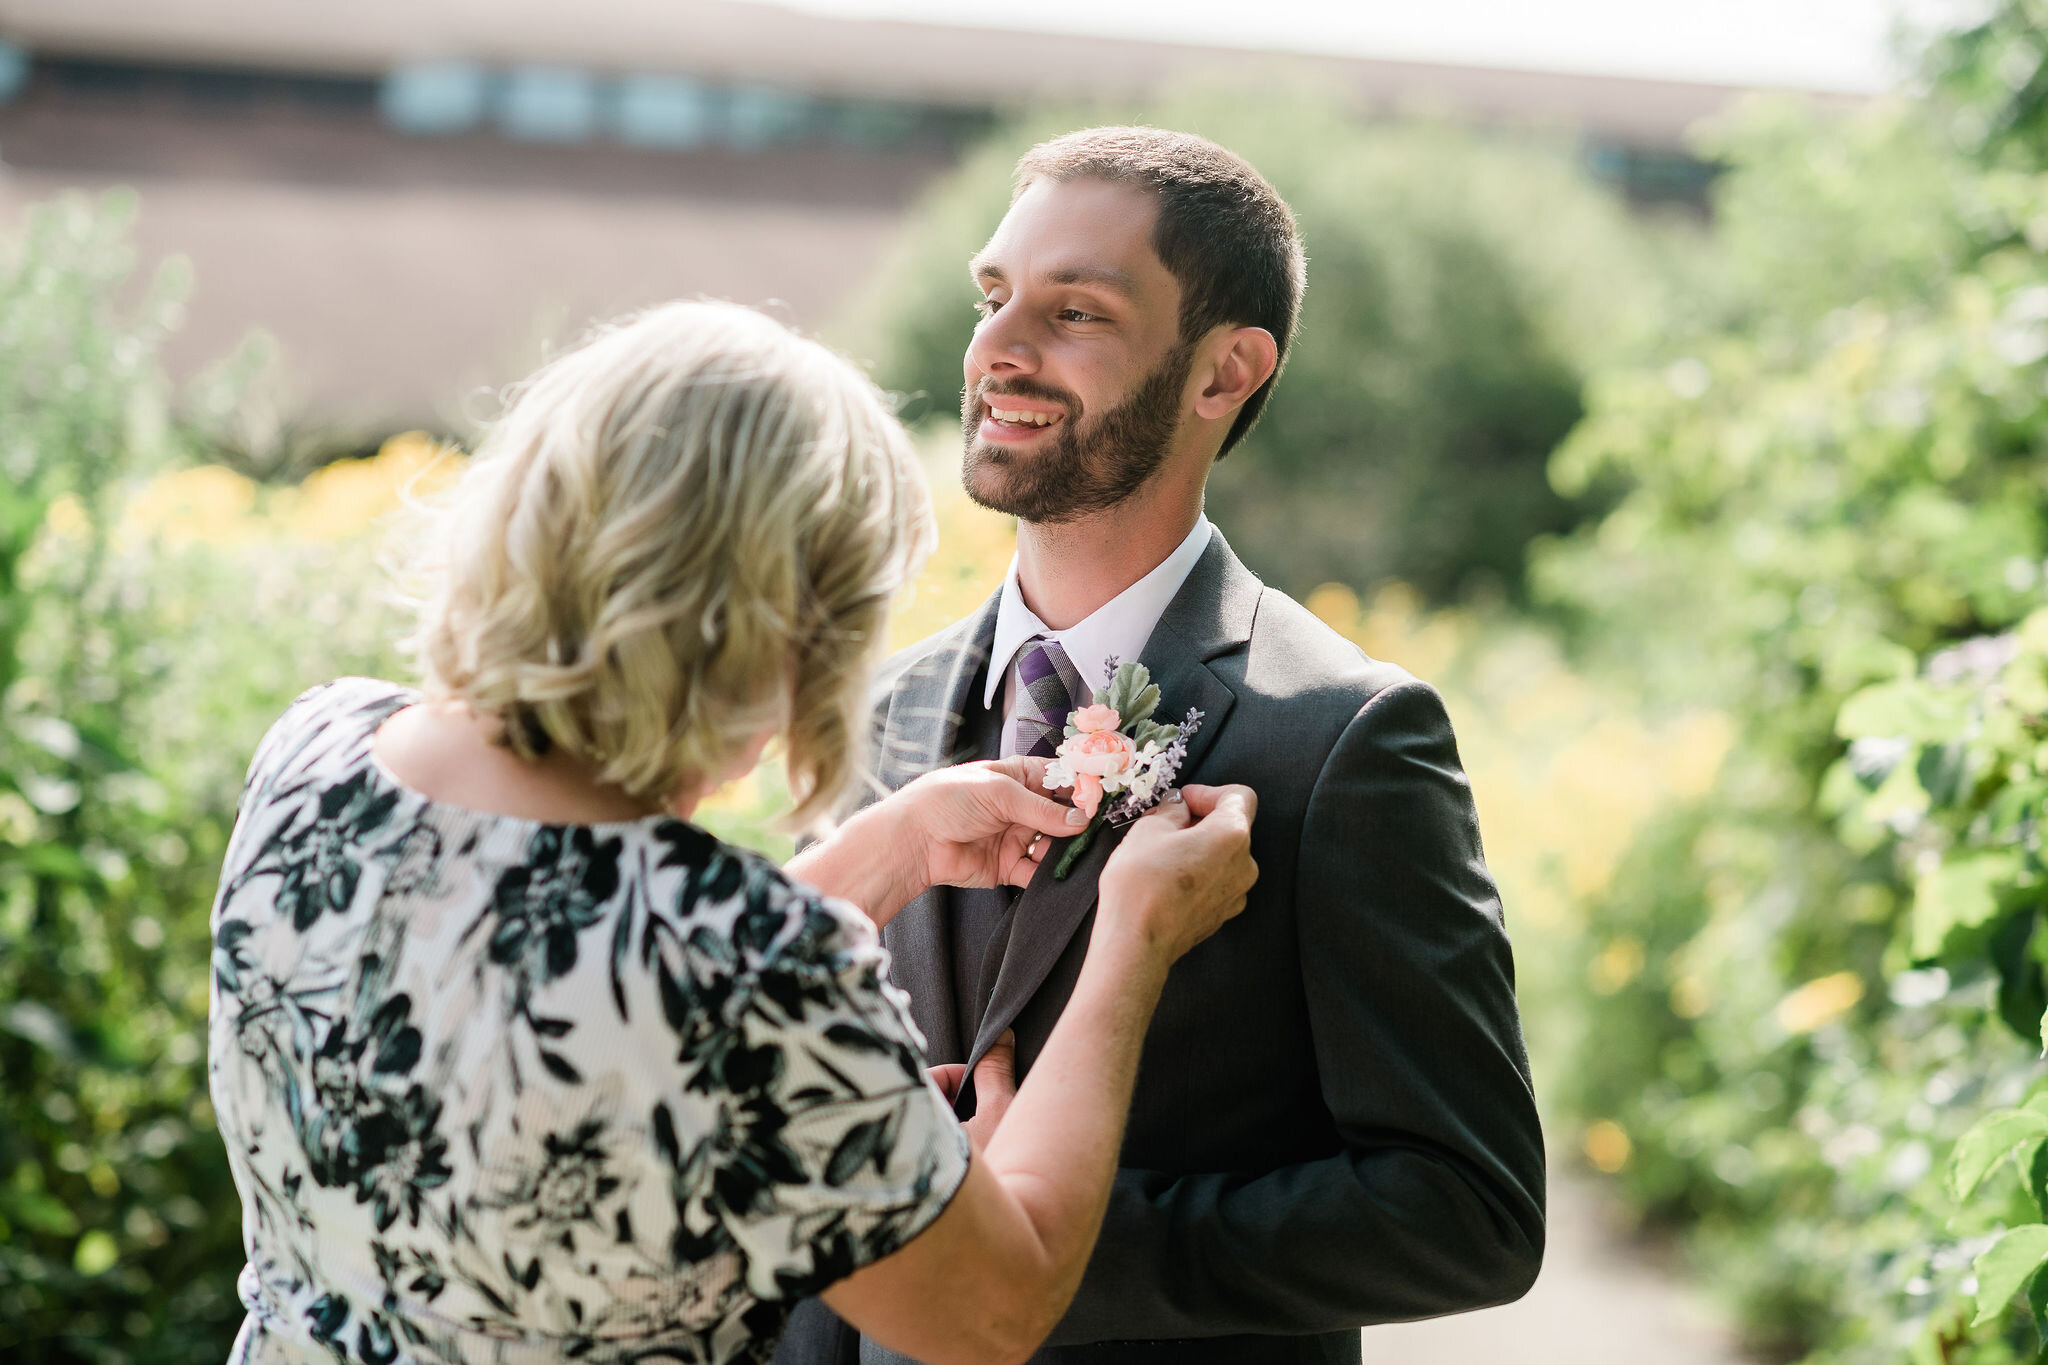 Mother of the groom pinning on his boutonniere